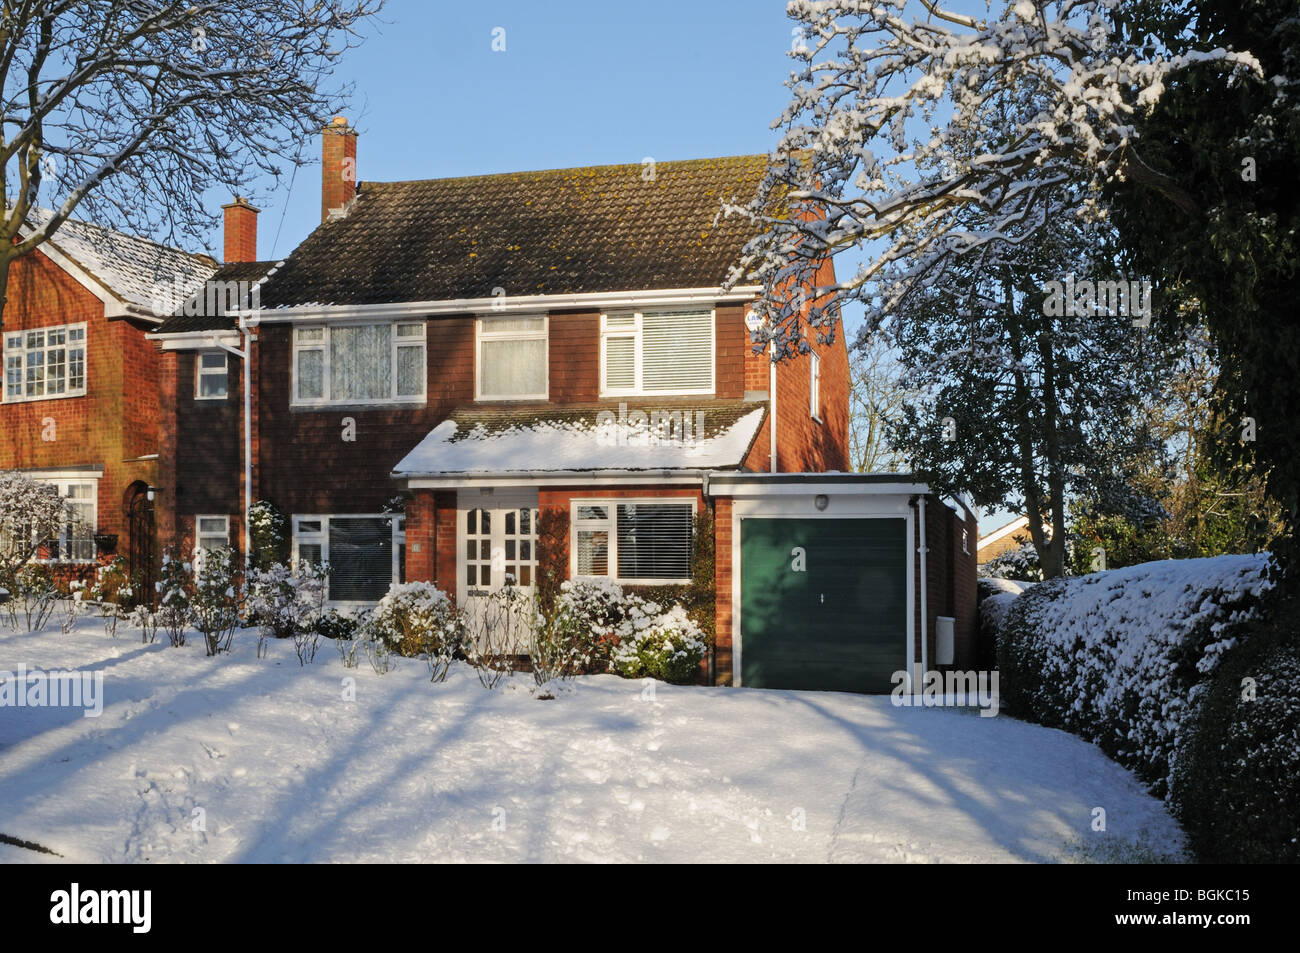 1960’s suburban detached four bedroomed house Lichfield Staffordshire on snowy winter’s day 2010 Stock Photo